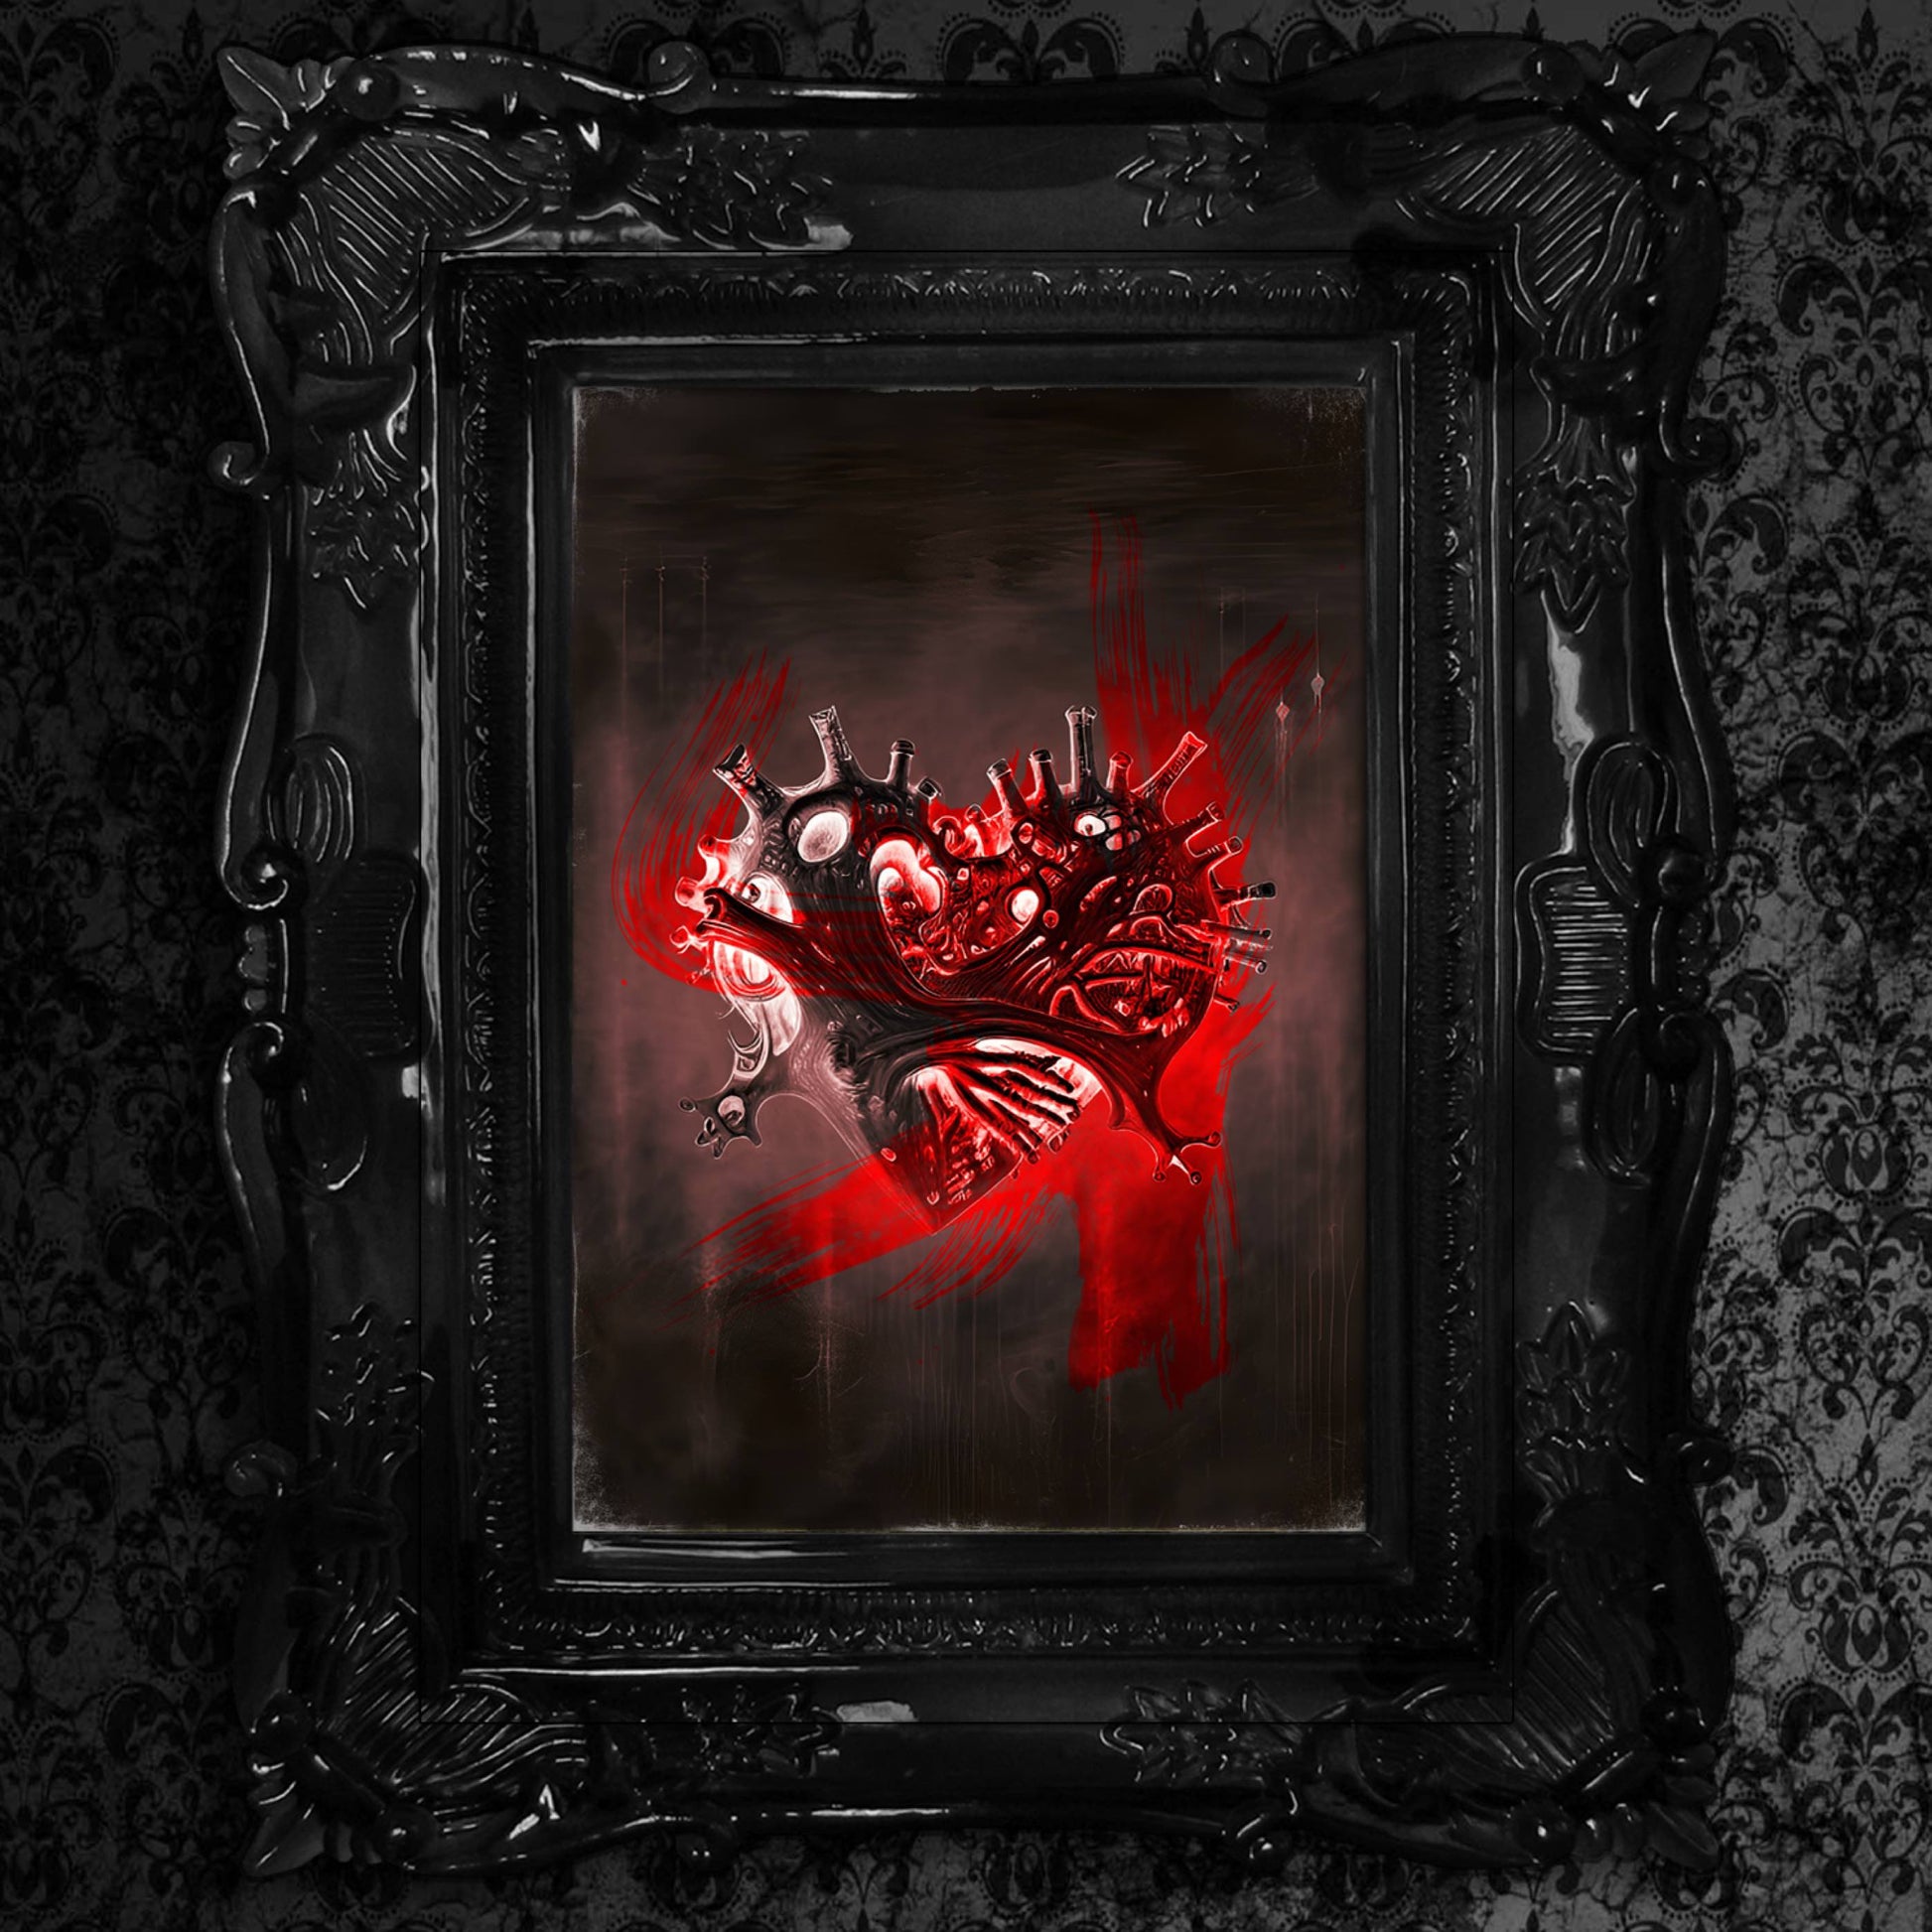 "Bizarre Love" combines romance and macabre, with an X-ray styled heart on an aged, worn negative background.